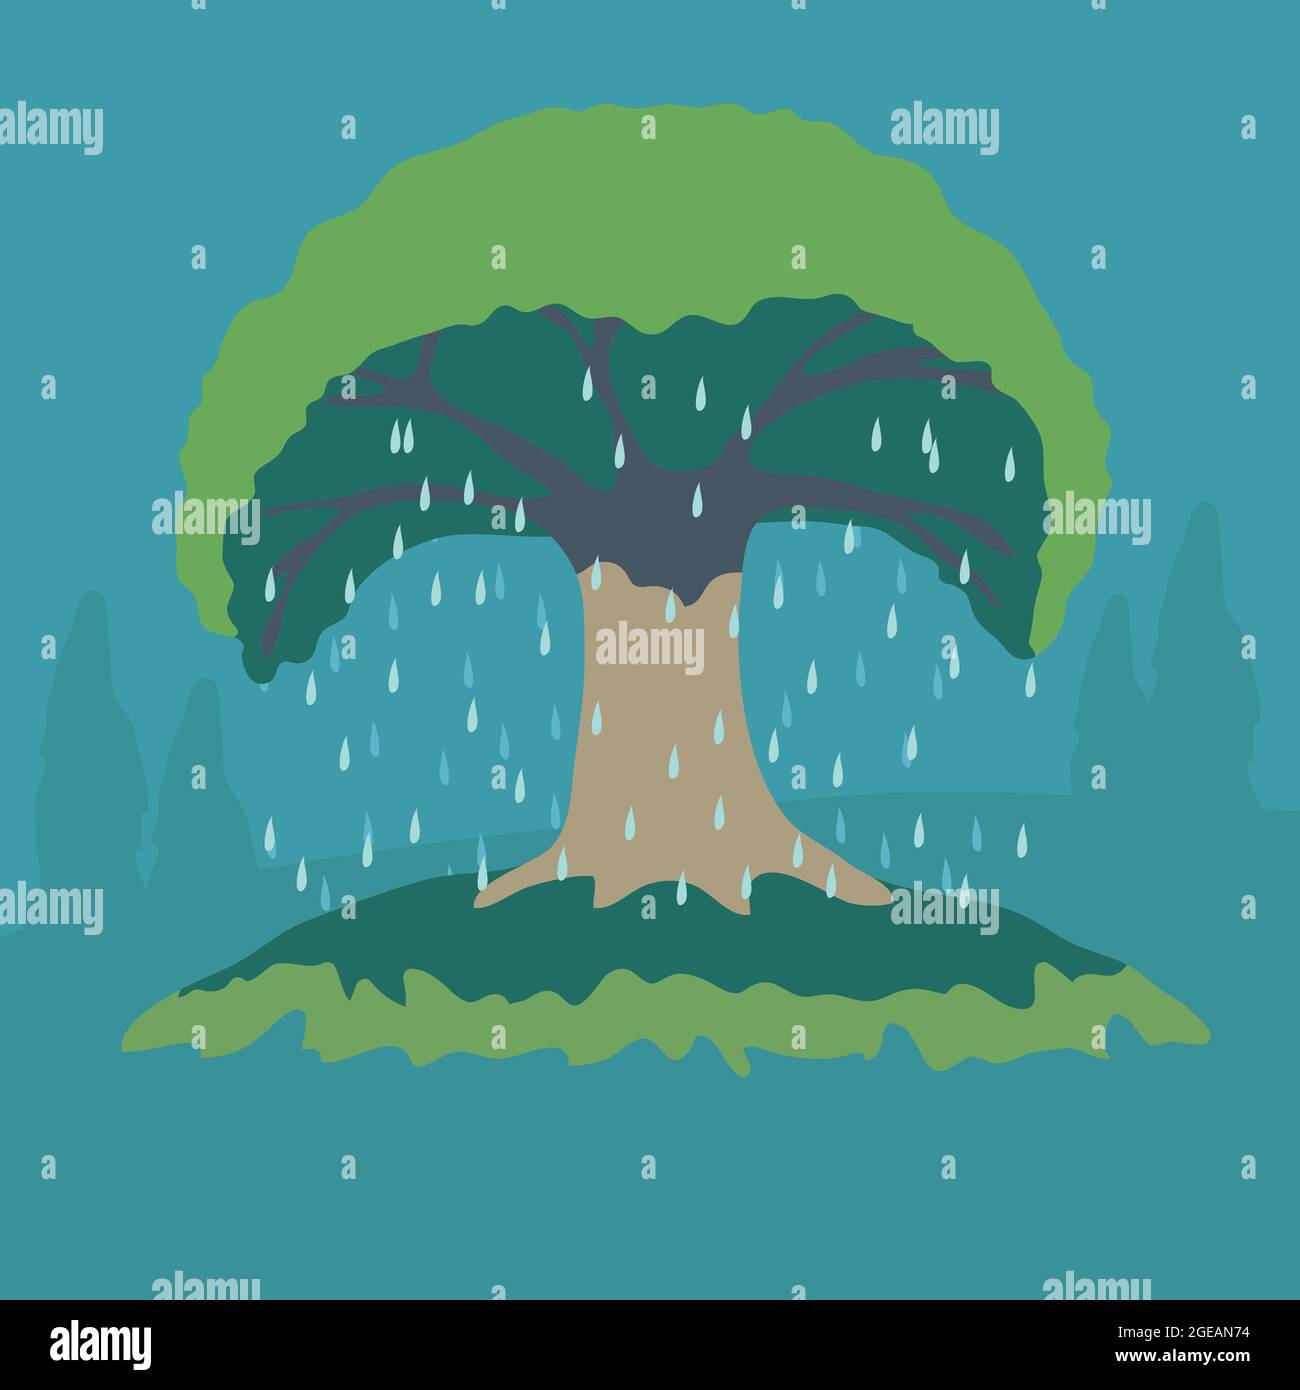 A tree after the rain Illustration. Stock Vector